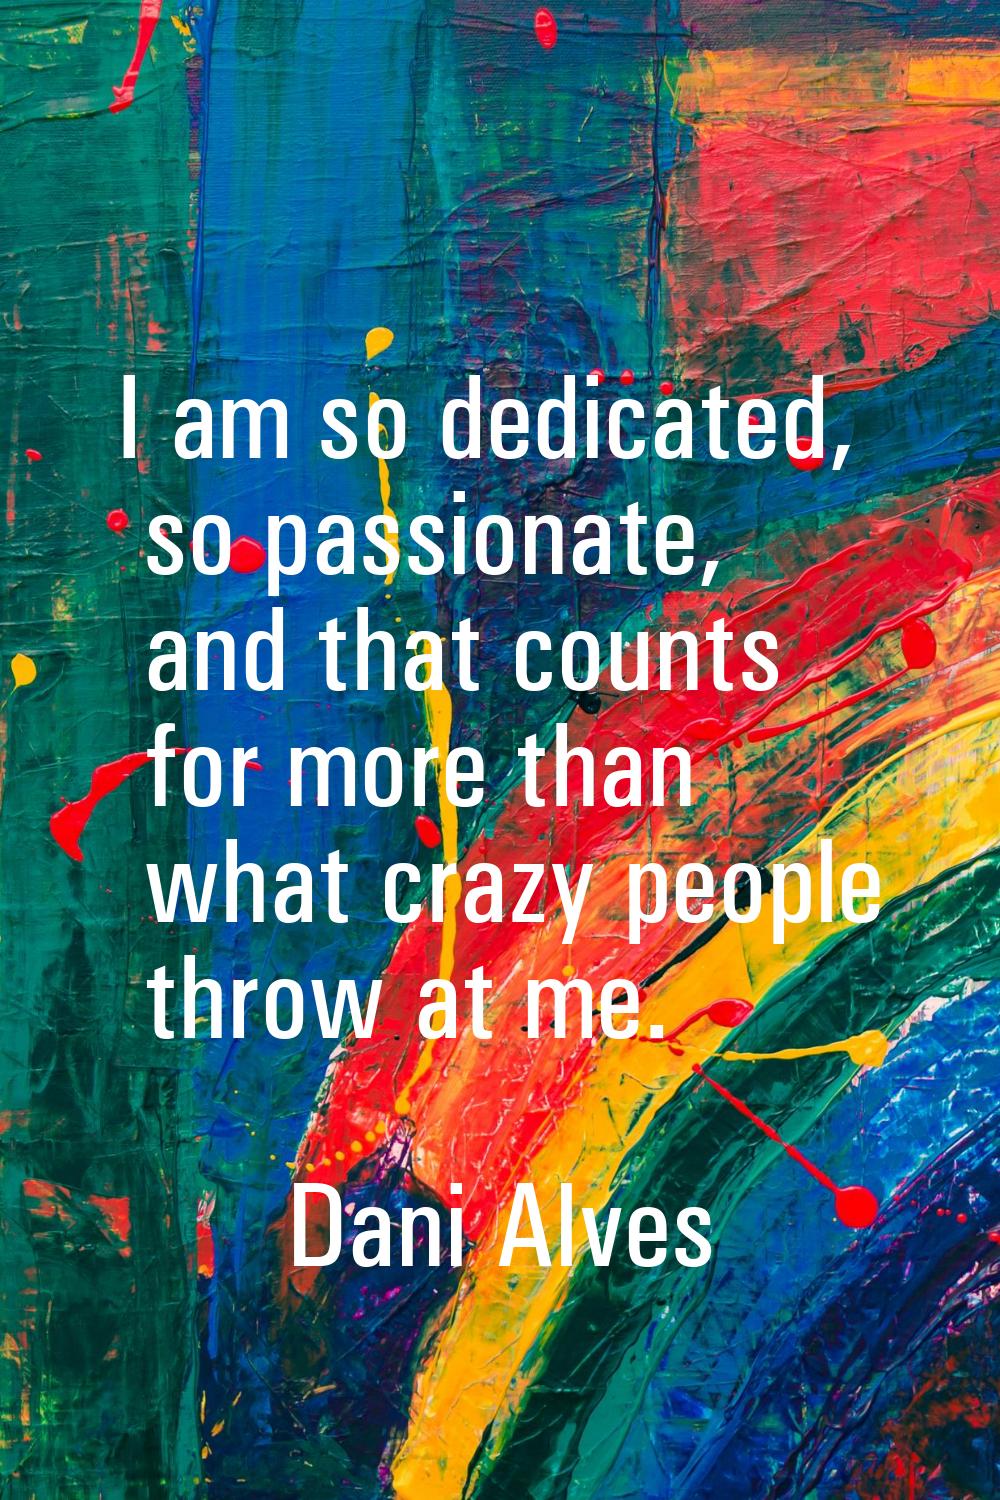 I am so dedicated, so passionate, and that counts for more than what crazy people throw at me.